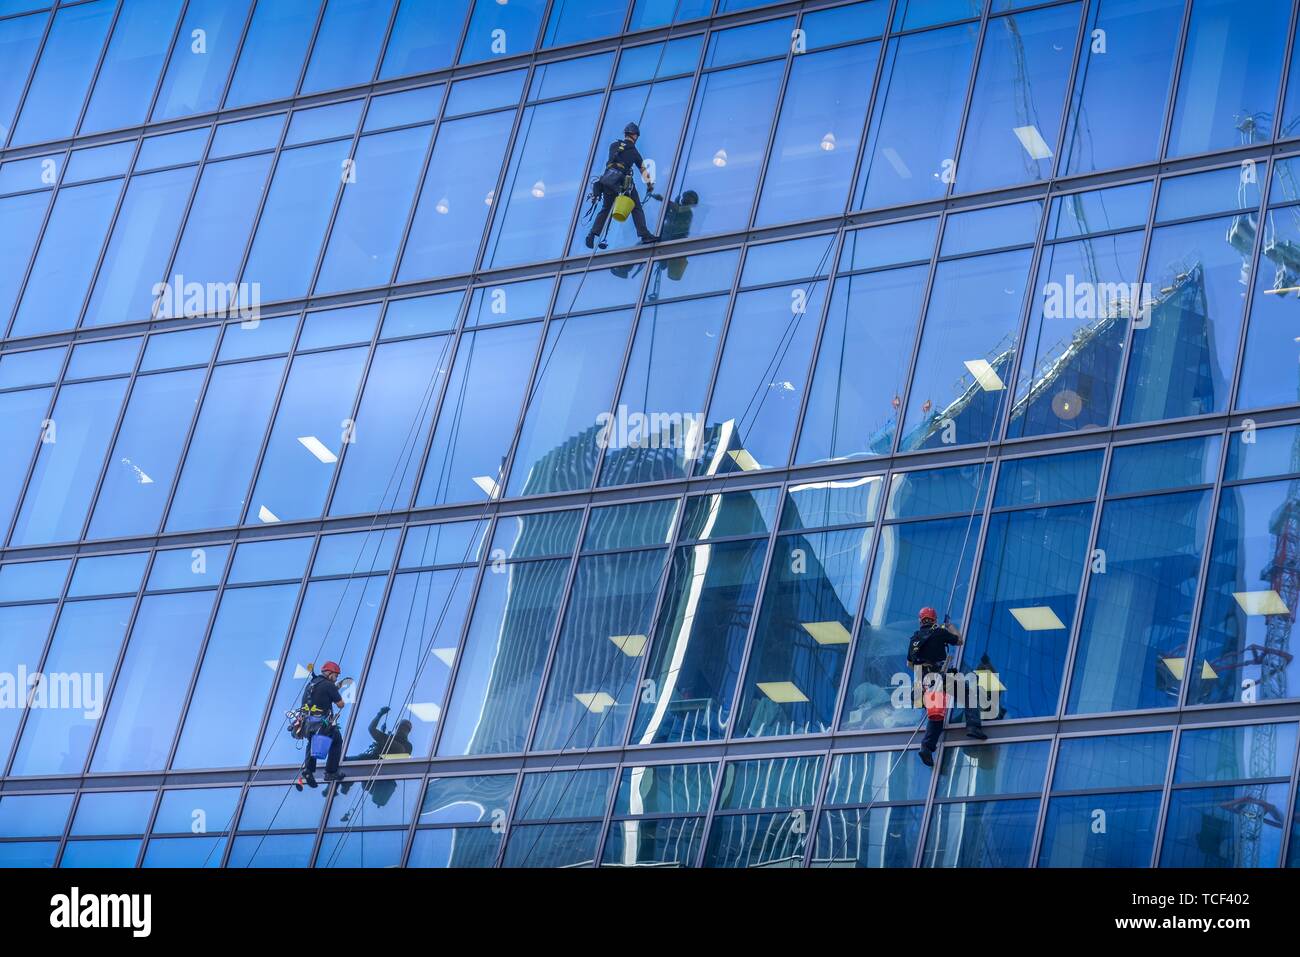 https://c8.alamy.com/comp/TCF402/window-cleaner-on-glass-facade-of-a-high-rise-building-financial-district-london-england-great-britain-TCF402.jpg